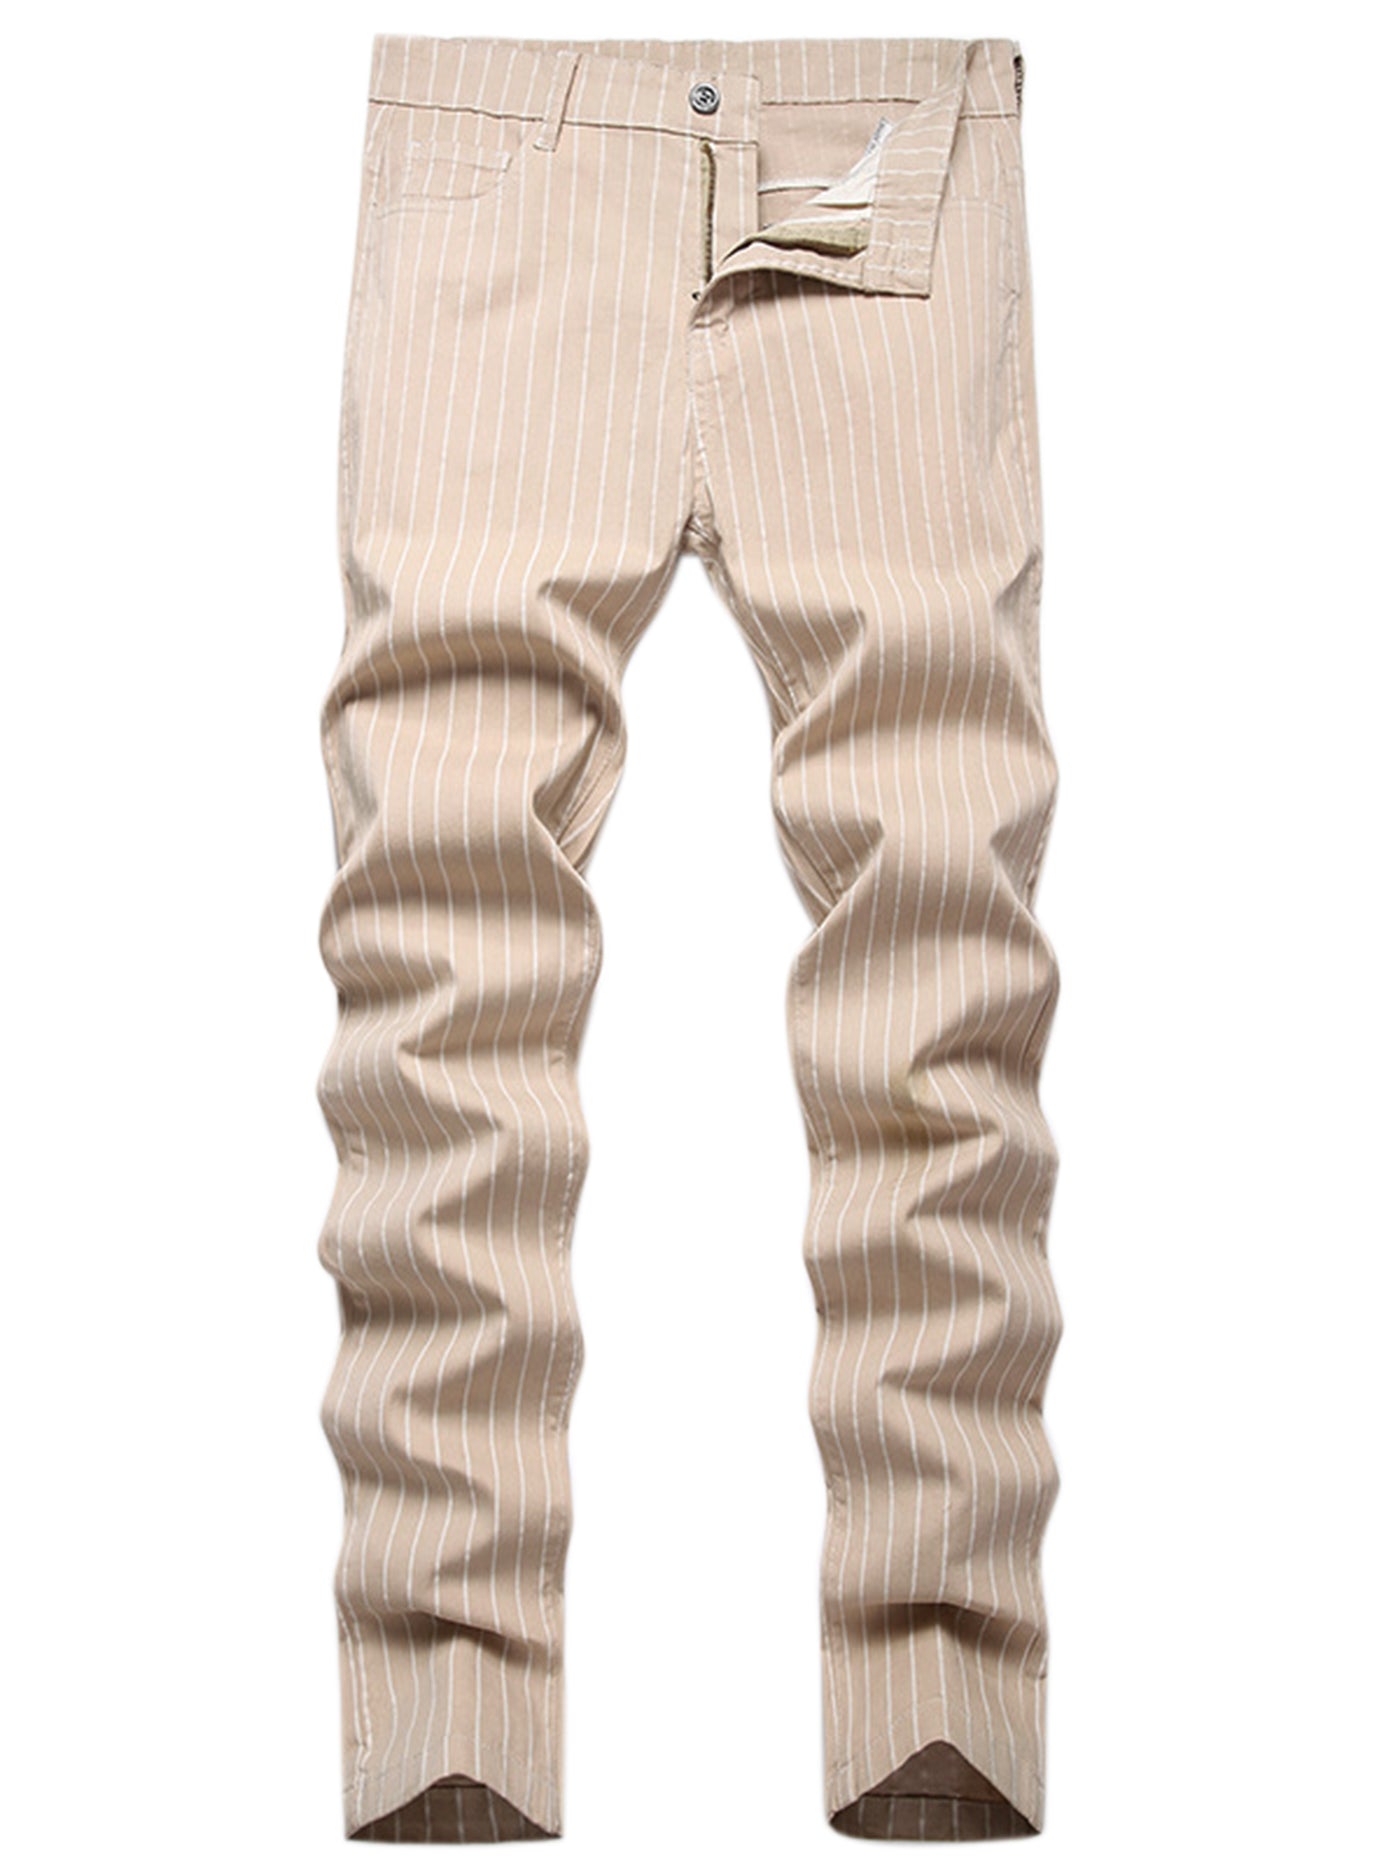 Bublédon Striped Pants for Men's Skinny Flat Front Business Chino Trousers